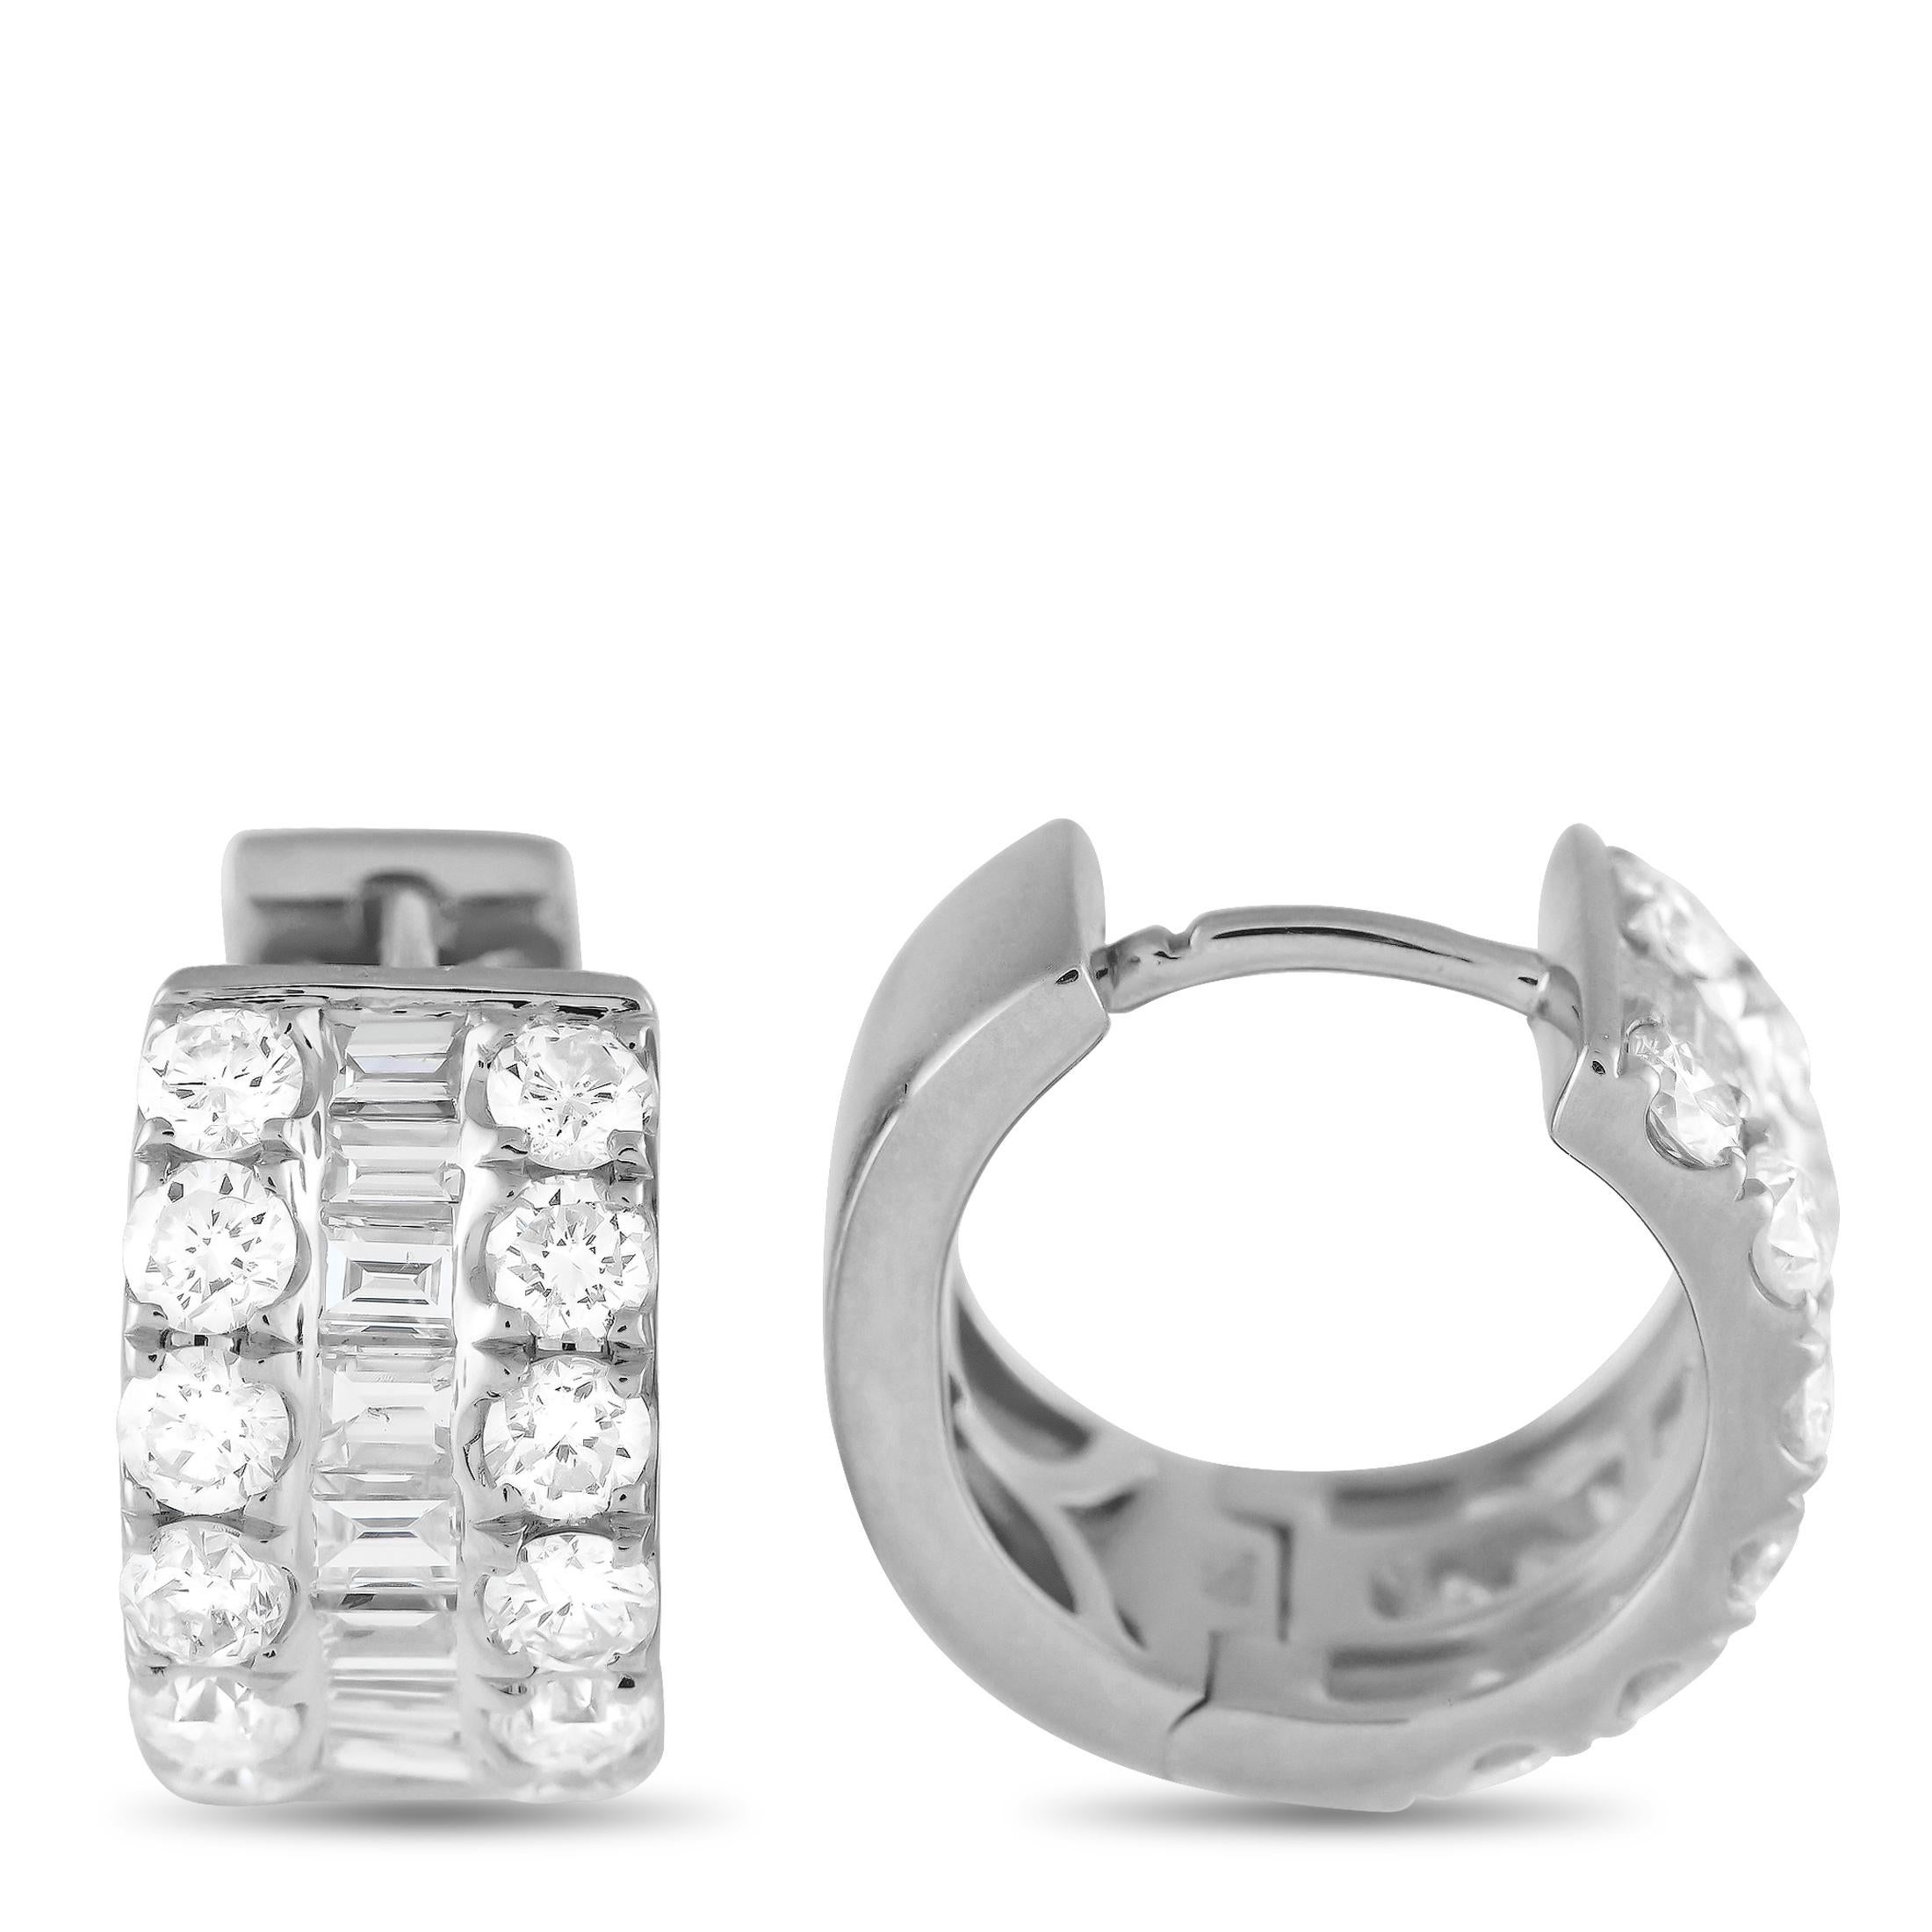 Elevate your jewelry collection with this pair of diamond huggie hoops. These earrings radiate timeless elegance with their triple rows of diamonds. Each earring is adorned with a brilliant channel of baguette diamonds, sandwiched between rows of